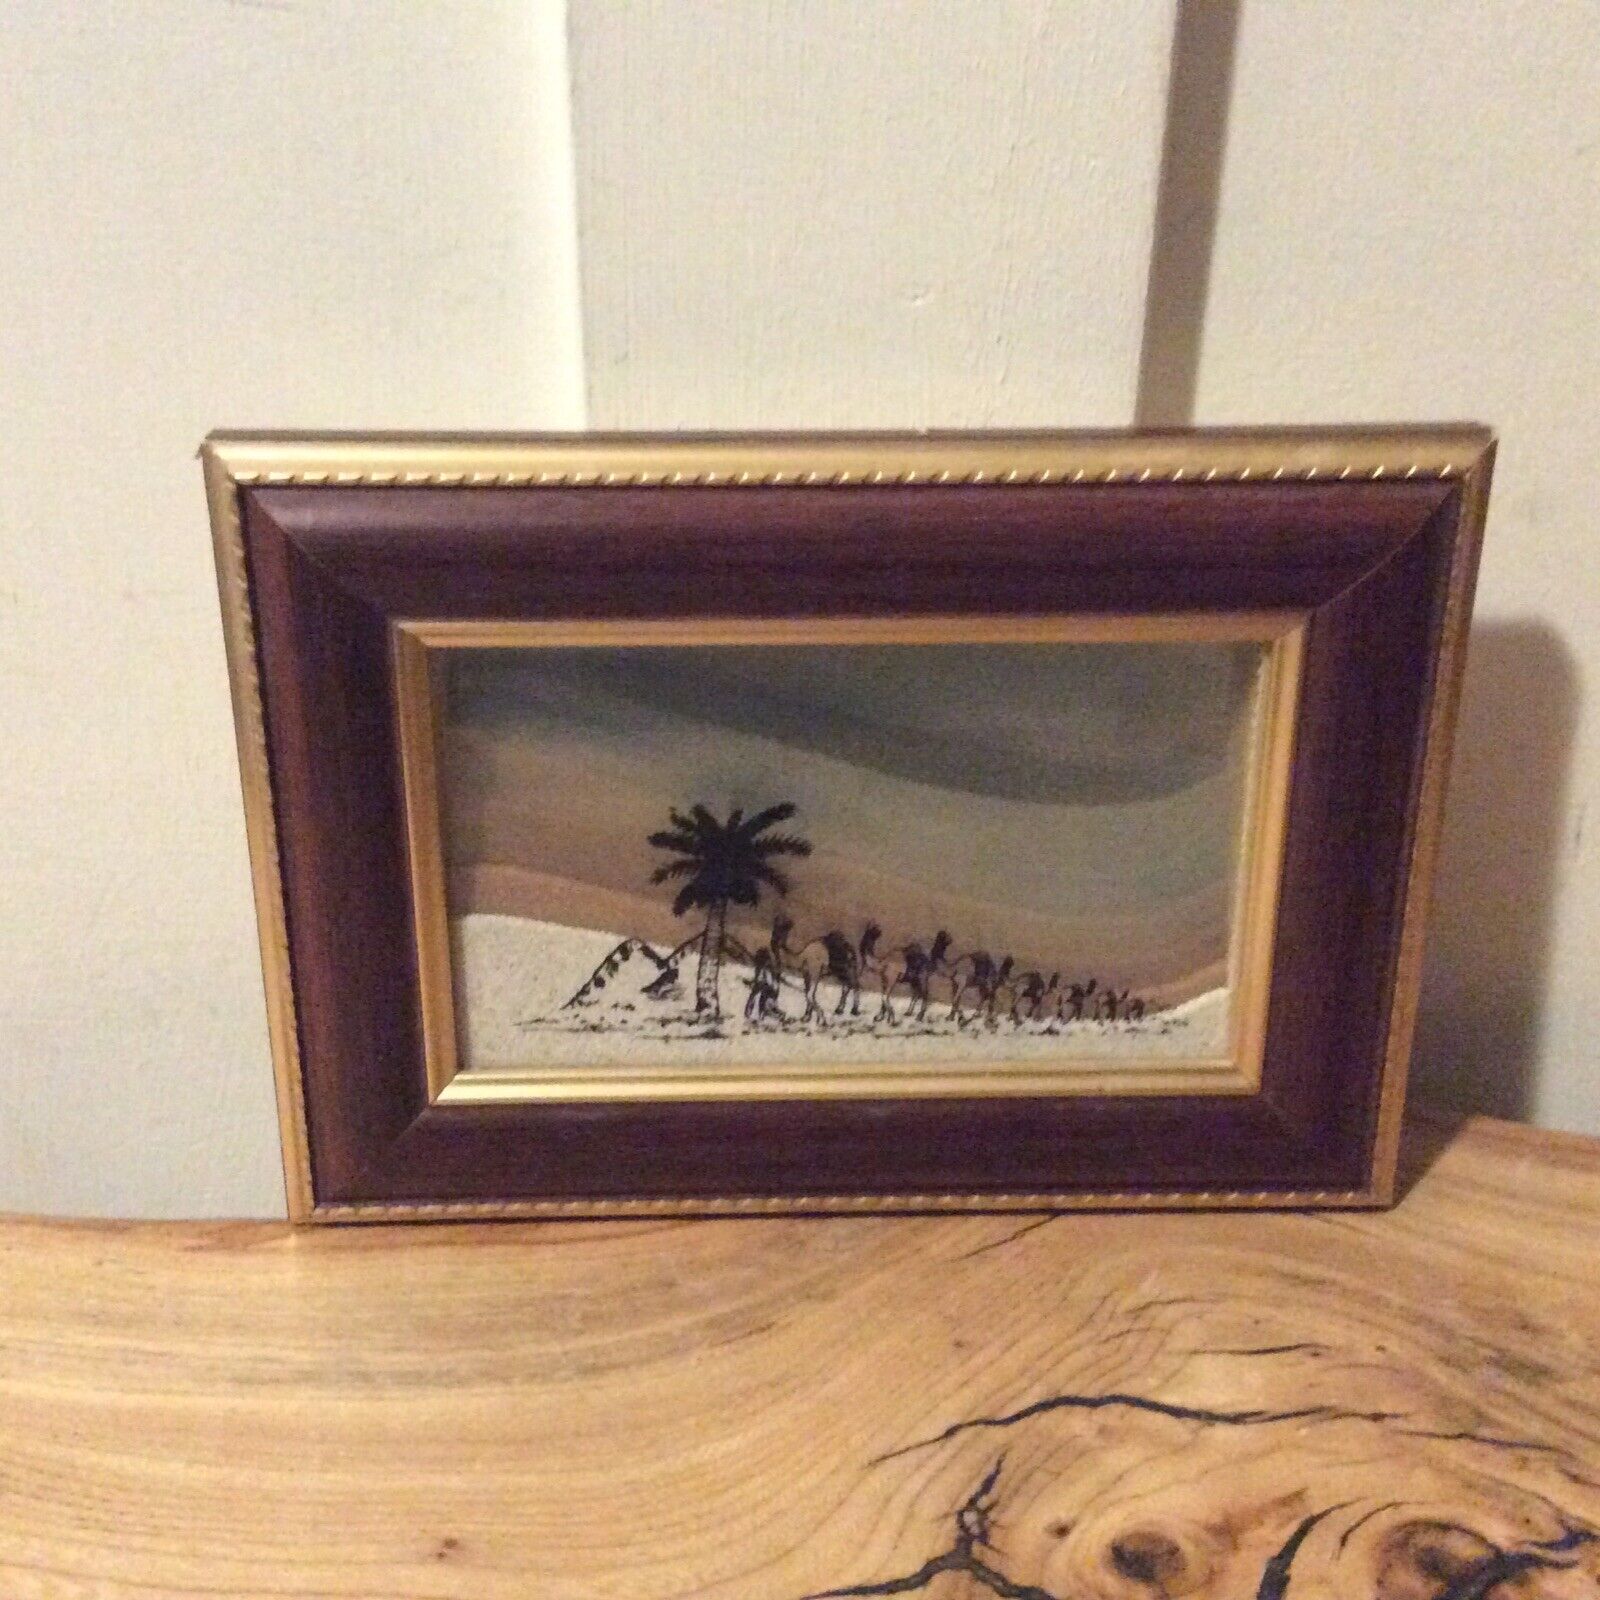 CAMEL DESERT FRAMED PICTURE 7 COLOR SANDS FROM THE U.A.E. MEMORIES UNPERISHED 